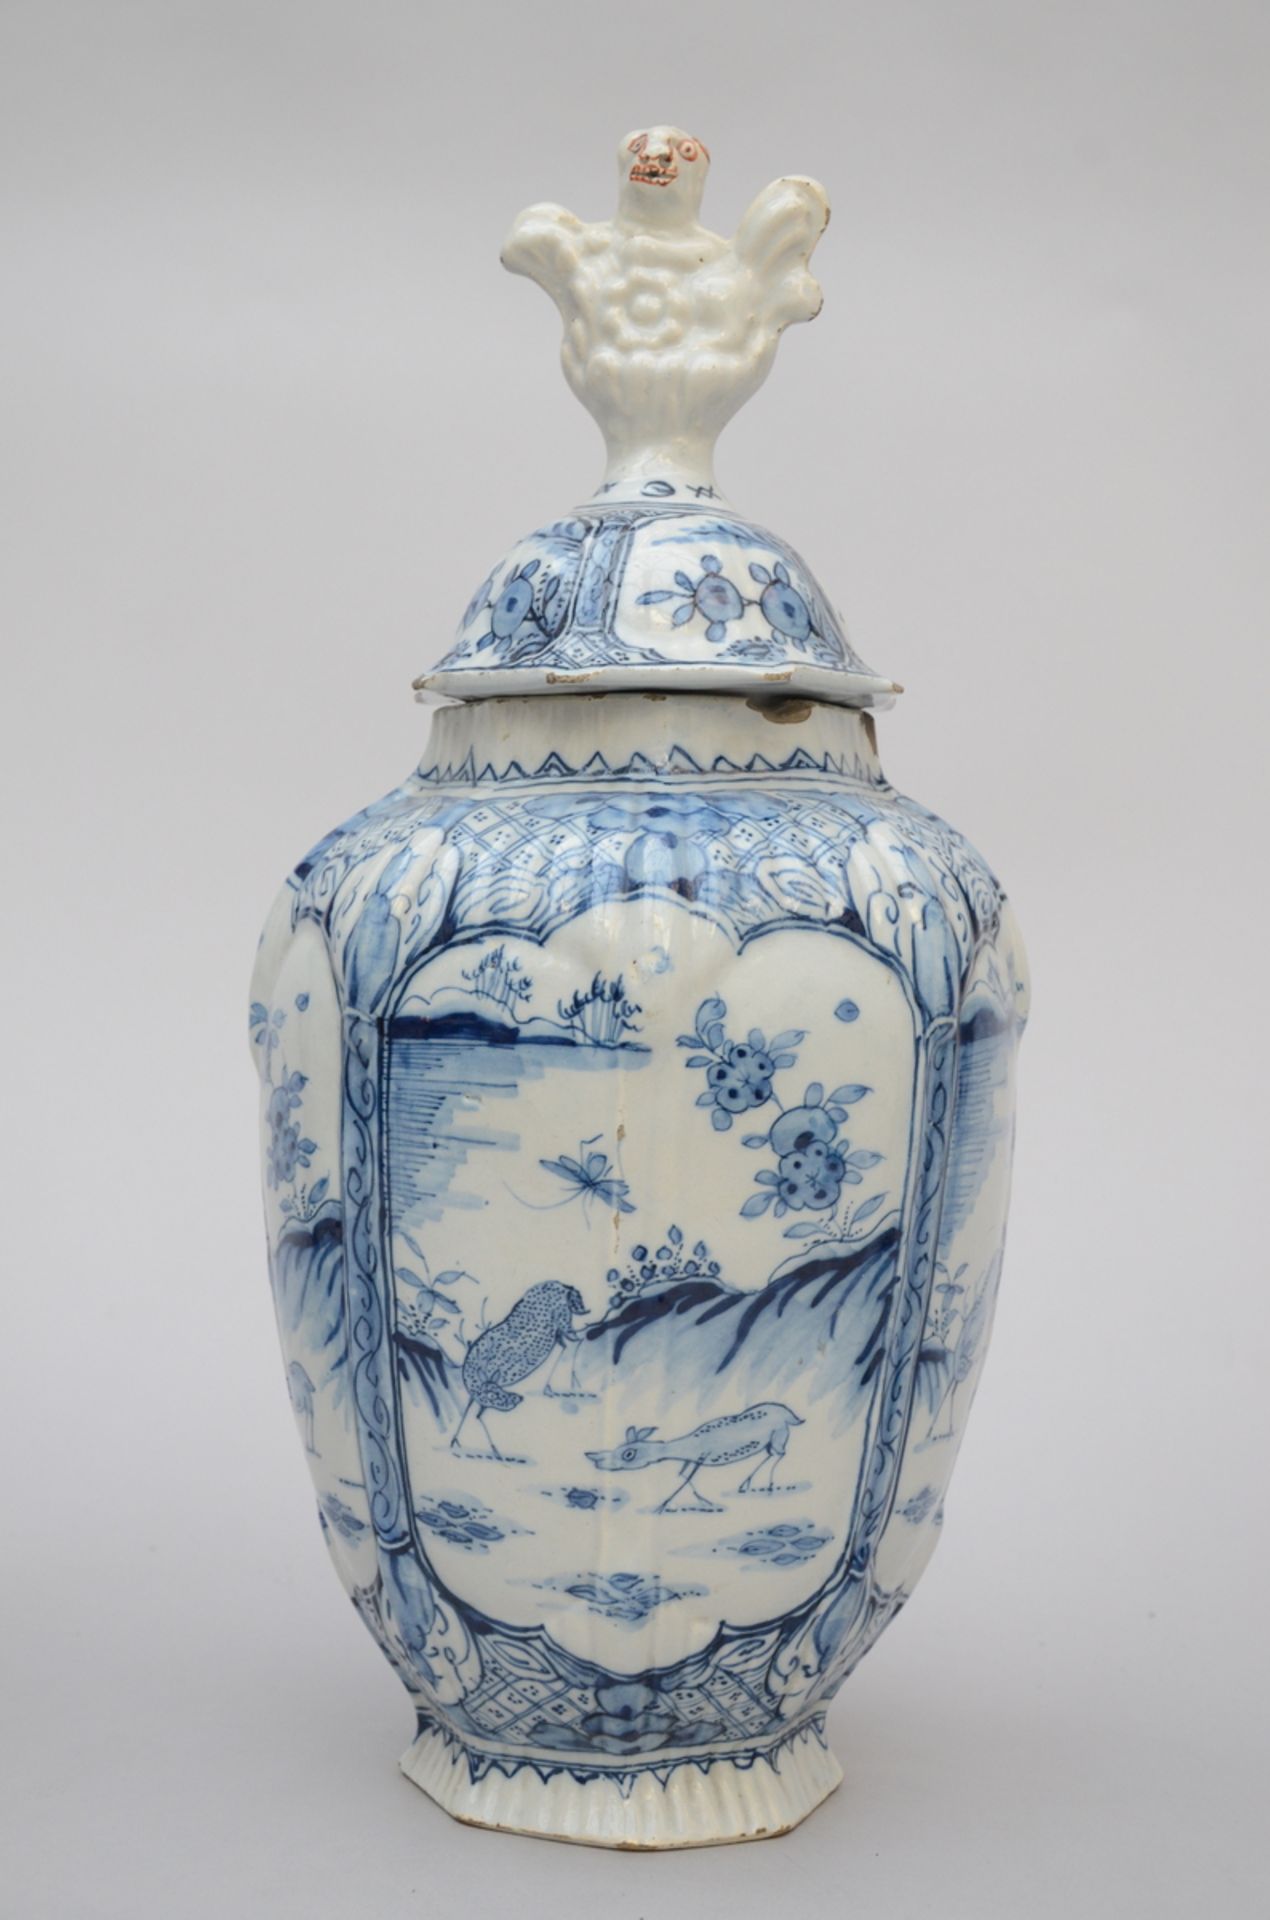 A five-piece blue and white set in Delft earthenware with chinoiserie decoration, 18th century ( - Image 2 of 6